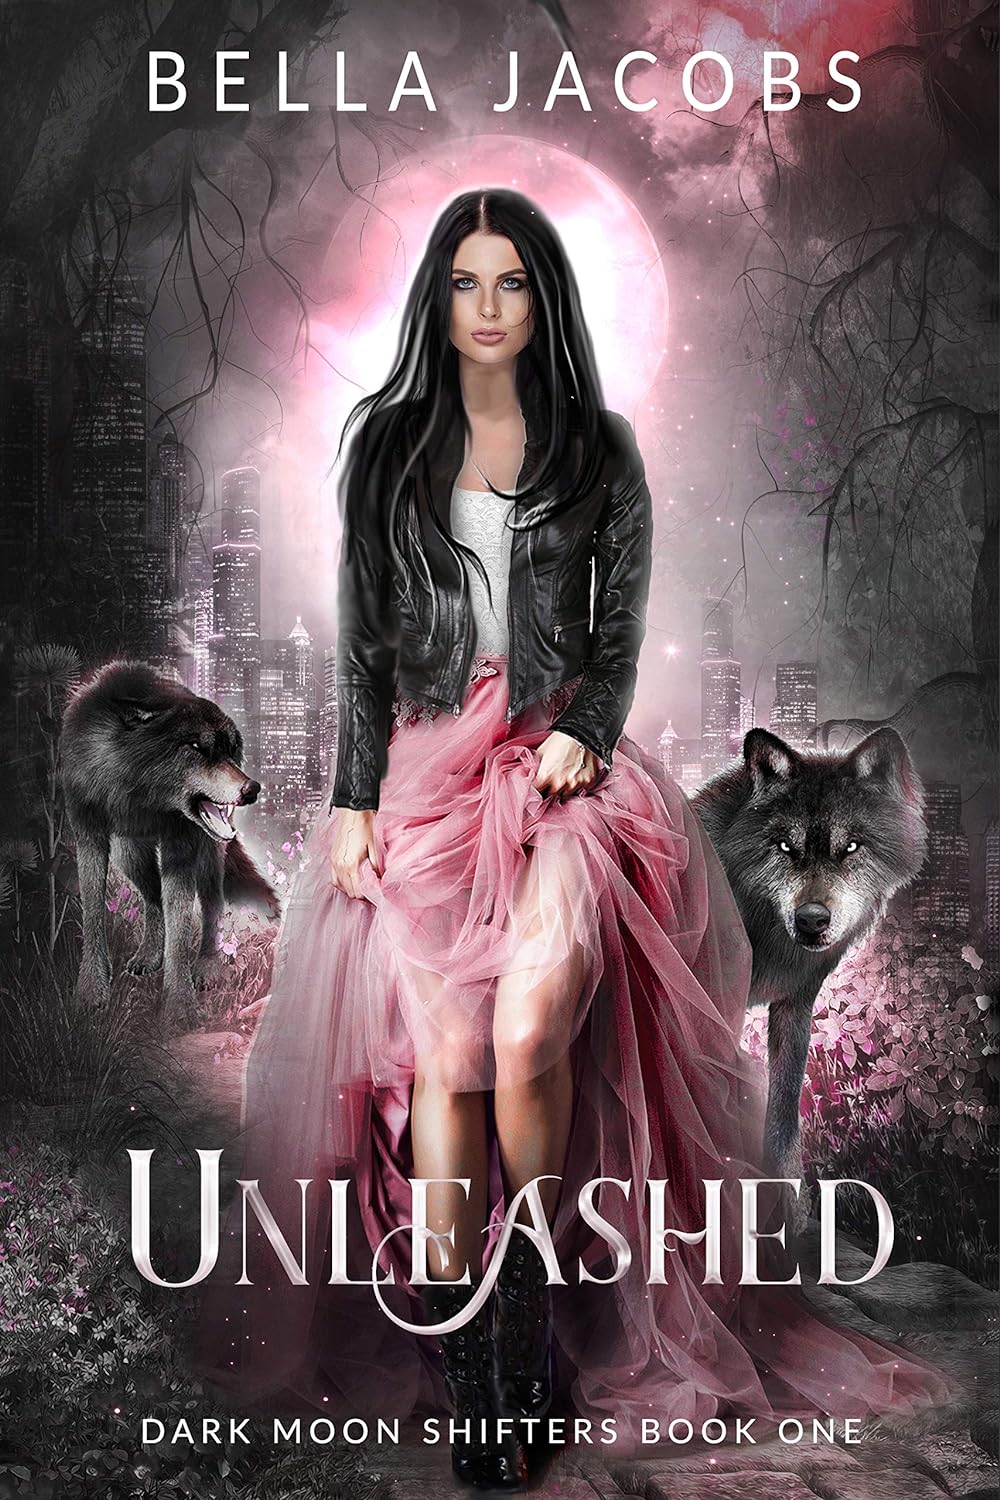 Unleashed Dark Moon Shifters Paranormal Romance by Bestselling Author Bella Jacobs